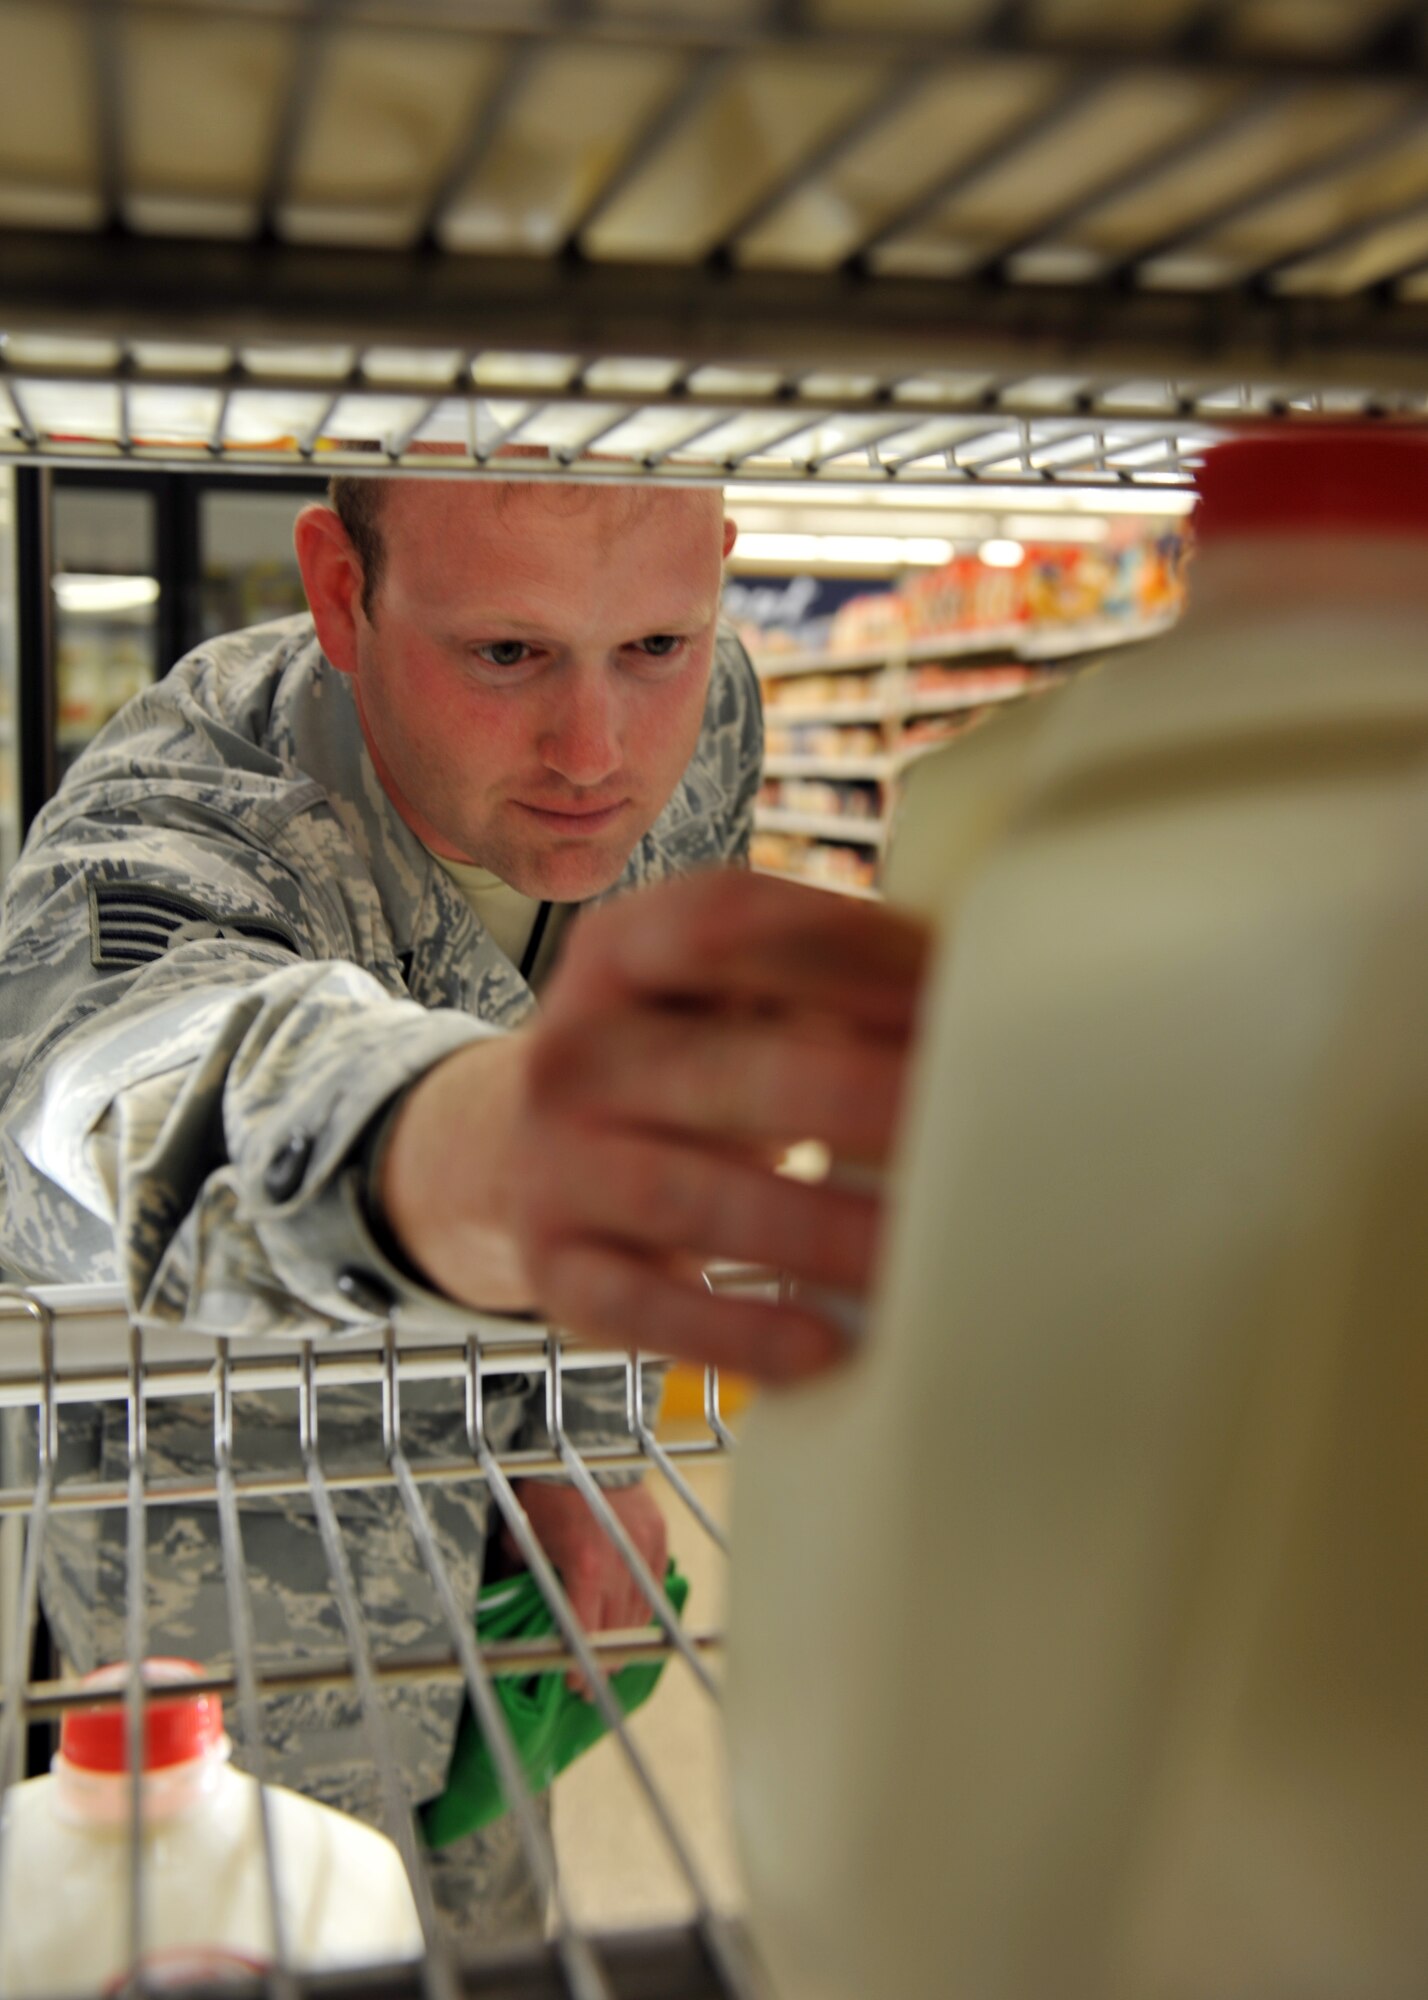 Staff Sgt. Brett Lodwick, 509th Munitions Squadron munitions systems craftsman, reaches for a gallon of milk to compare ingredients during a commissary tour at Whiteman Air Force Base, Mo., May 10, 2013. The Health and Wellness Center provides monthly tours of the commissary to familiarize Team Whiteman with the nutritional value of groceries they choices. (U.S. Air Force photo by Heidi Hunt/Released)